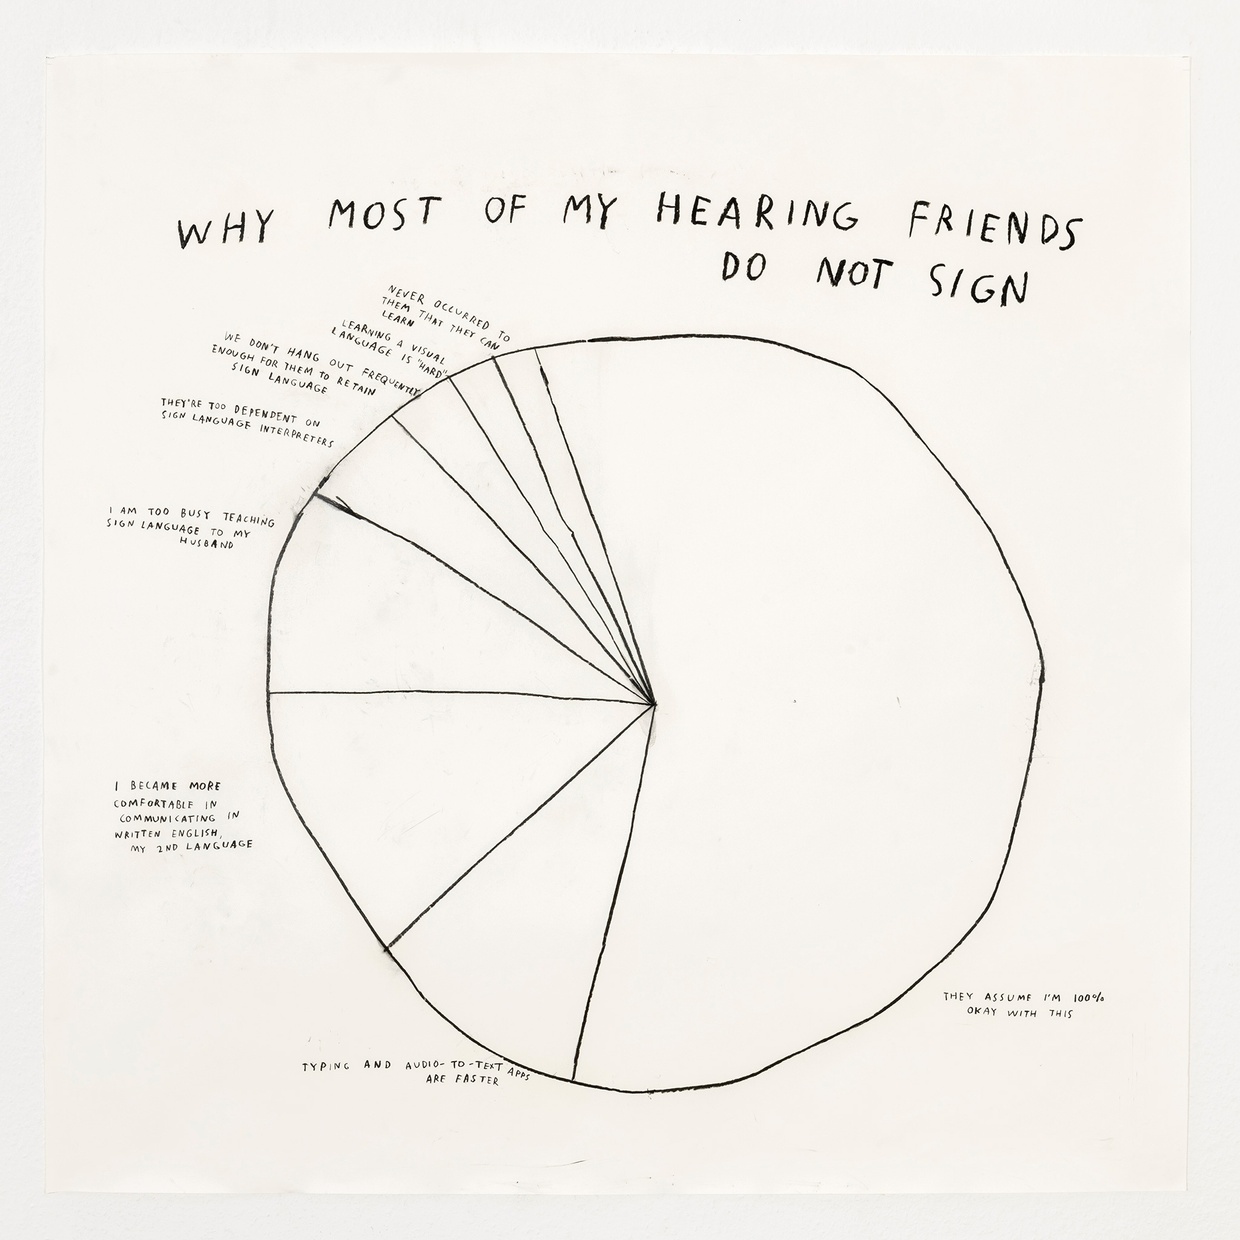 Drawing of a pie chart with the words “Why Most of My Hearing Friends Don’t Sign” above it. A little more than half the pie is one section, and then there are seven other sections of the pie on the left.